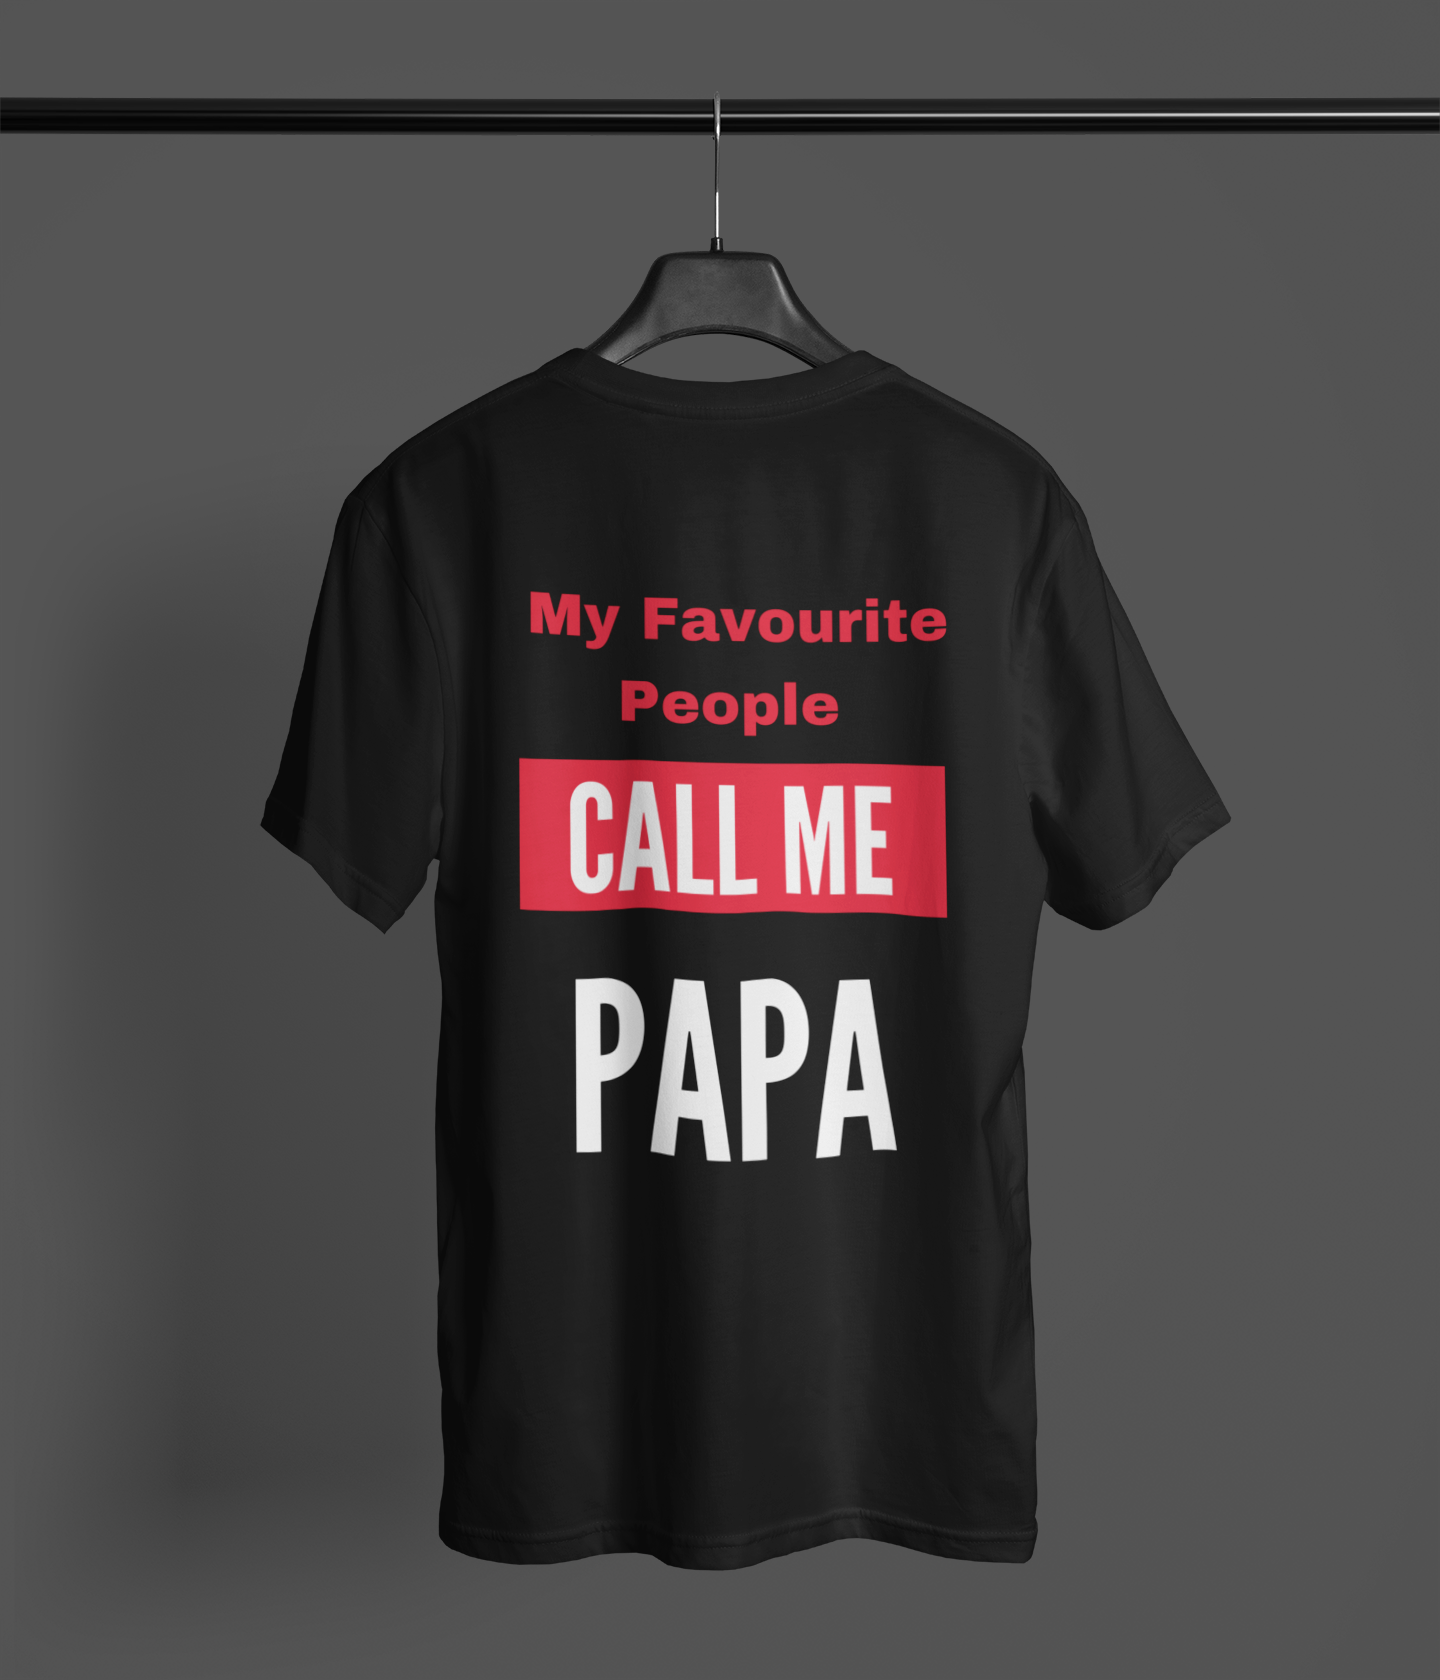 https://www.candidpot.com/products/papa-t-shirt-funny-papa-tshirt-grandpa-tshirt-funny-grandpa-tshirt-gift-for-grandpa-fathers-day-gift-my-favorite-people-call-me-papa-unisex-heavy-cotton-tee